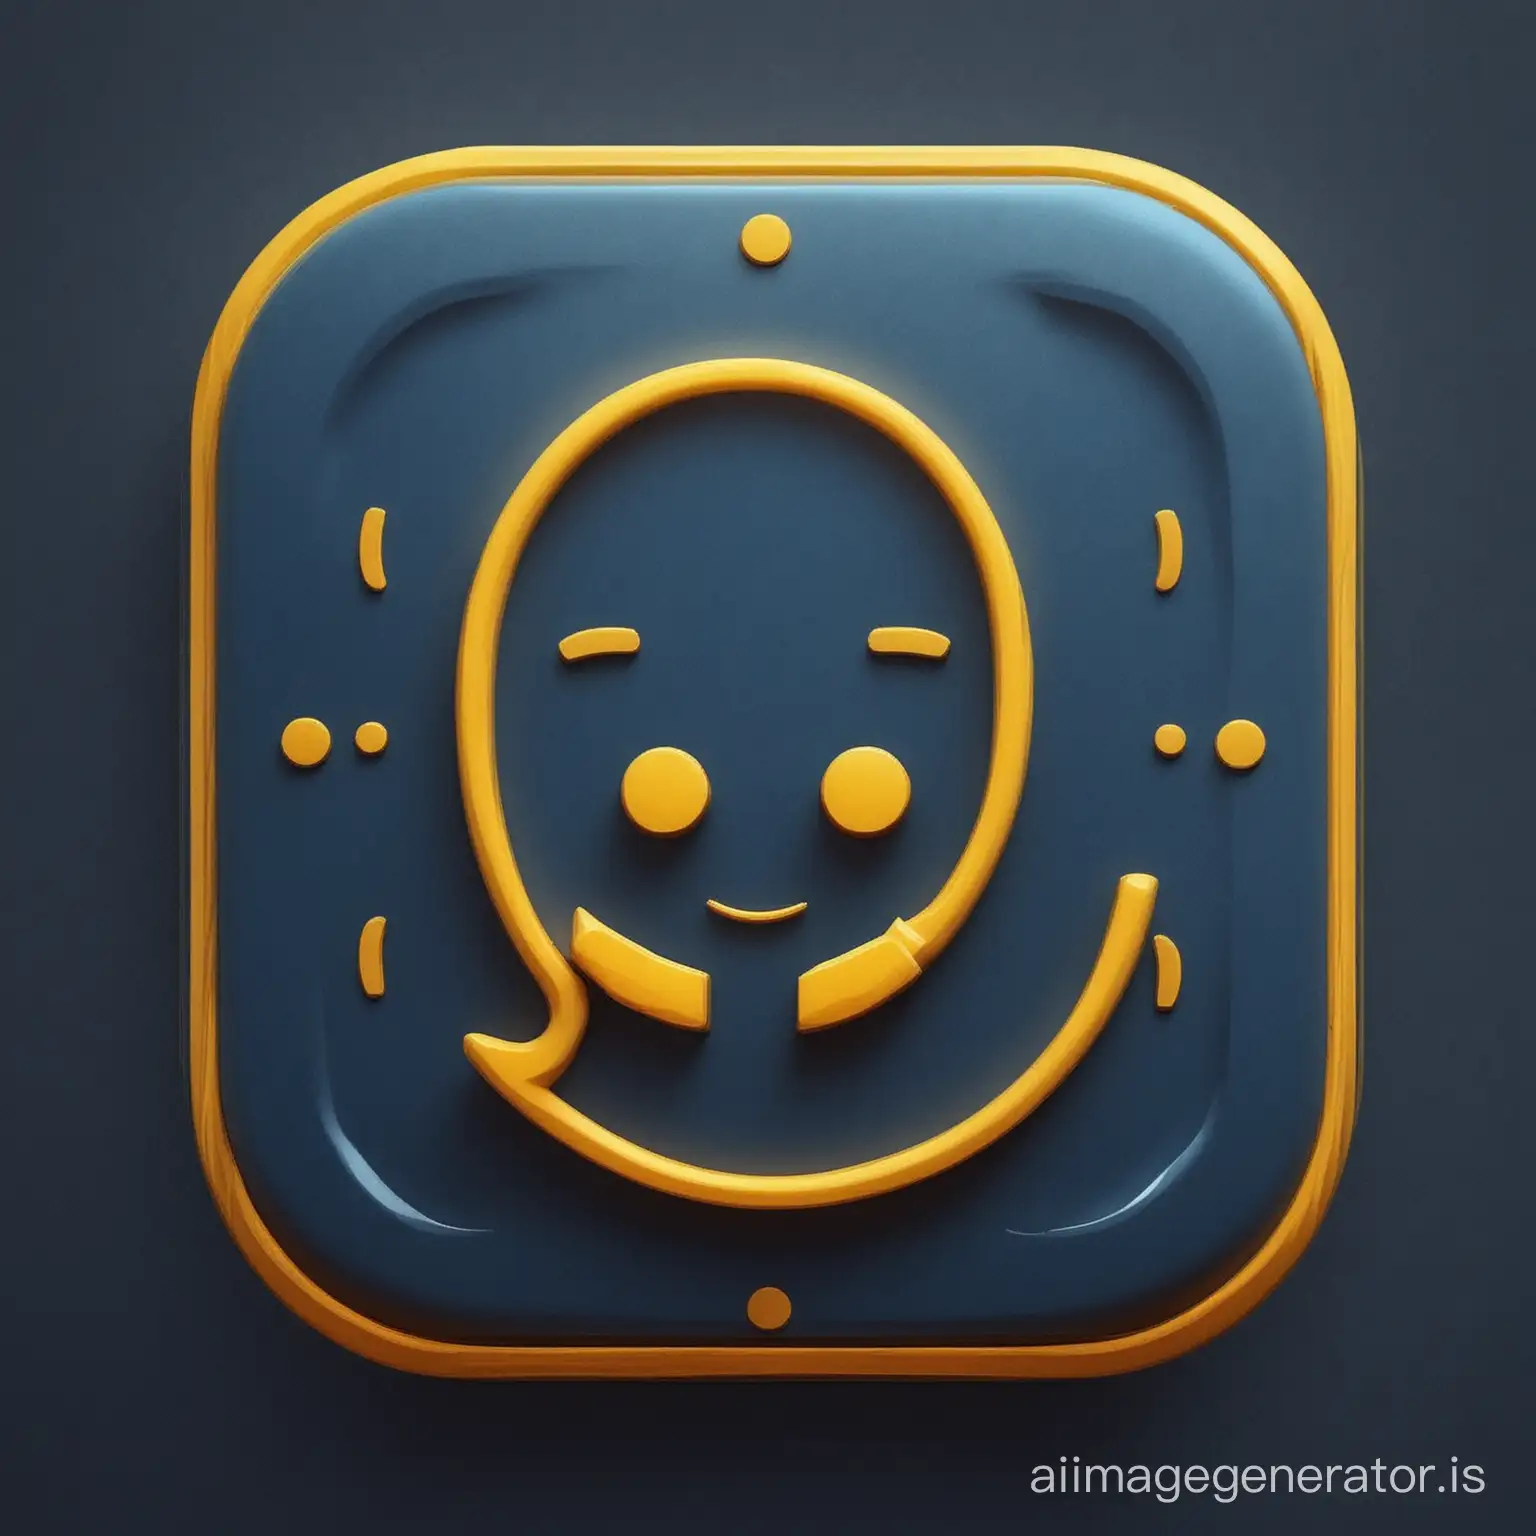 CREATE A 3D IMAGE OF THE ICON ON ME OF DARK BLUE COLOR AND YELLOW DETAILS